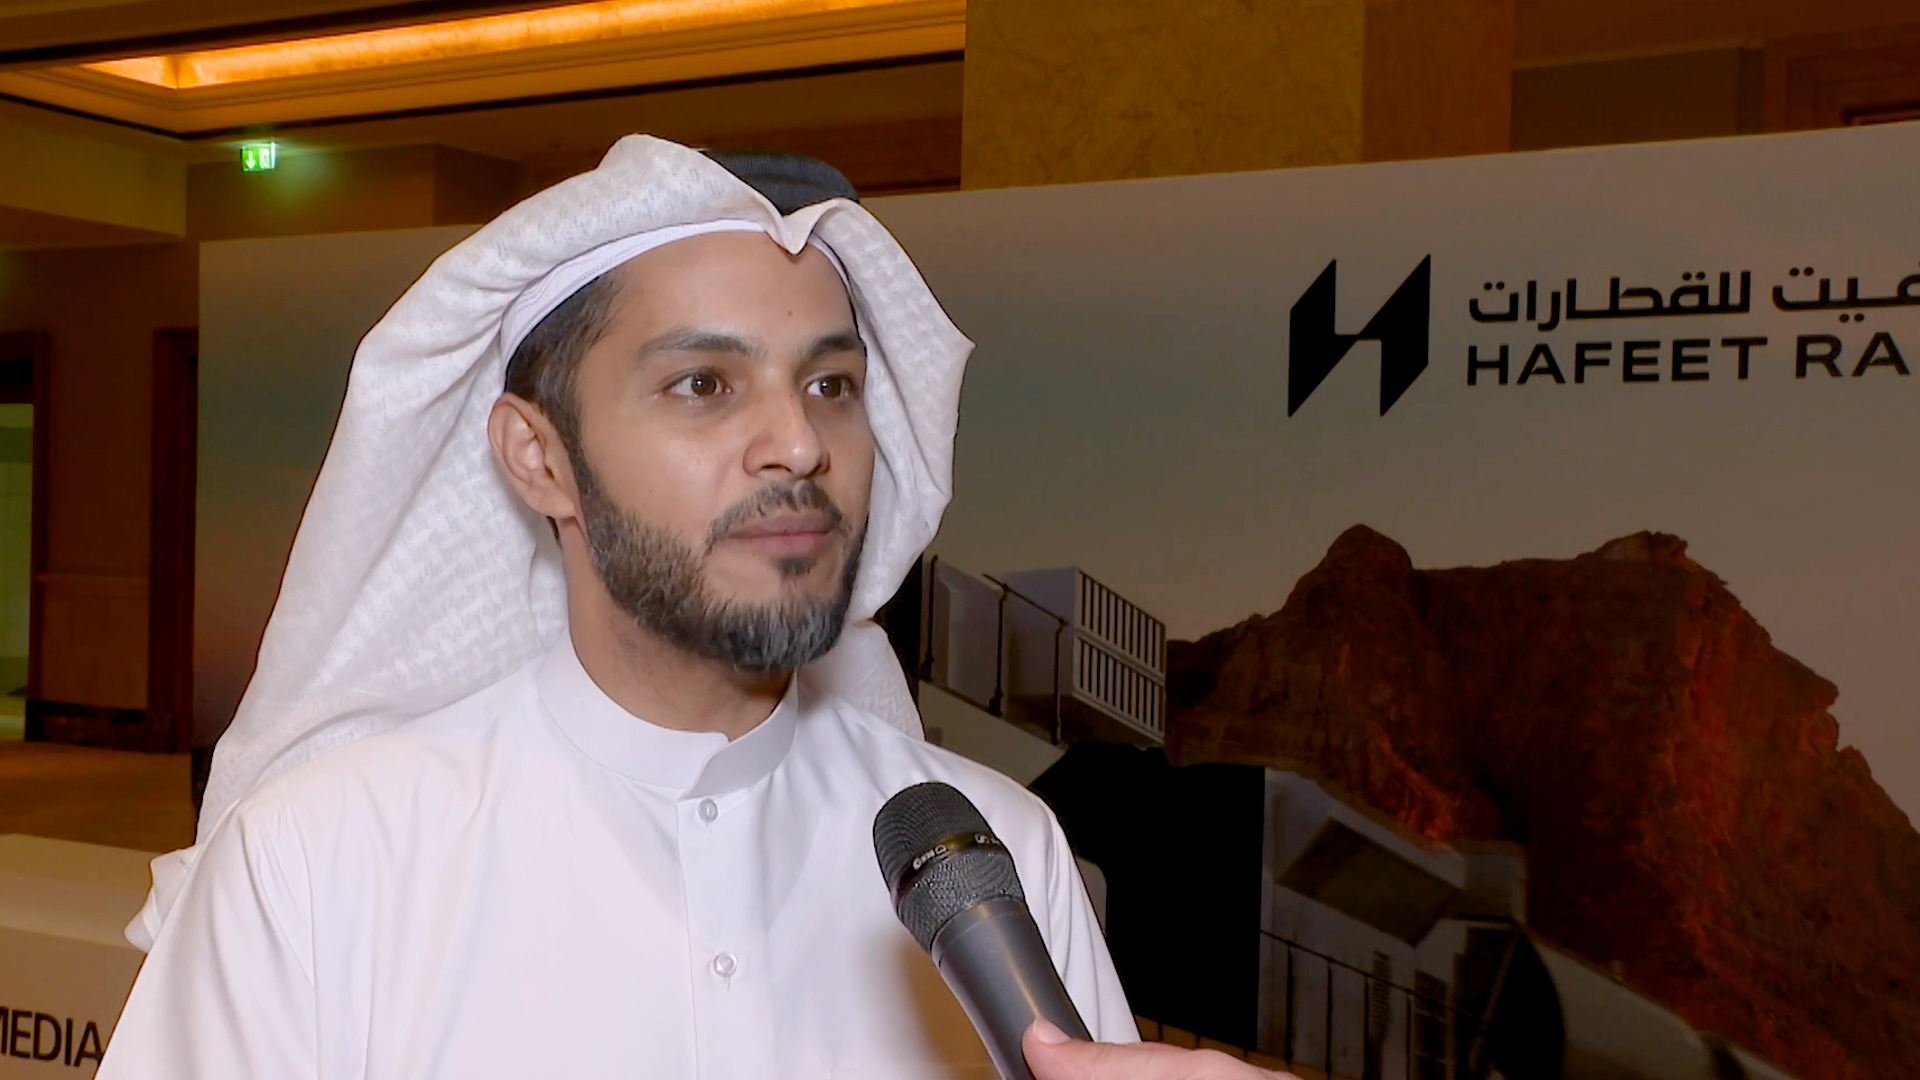 uae-oman railway project has entered implementation phase: ceo of hafeet rail